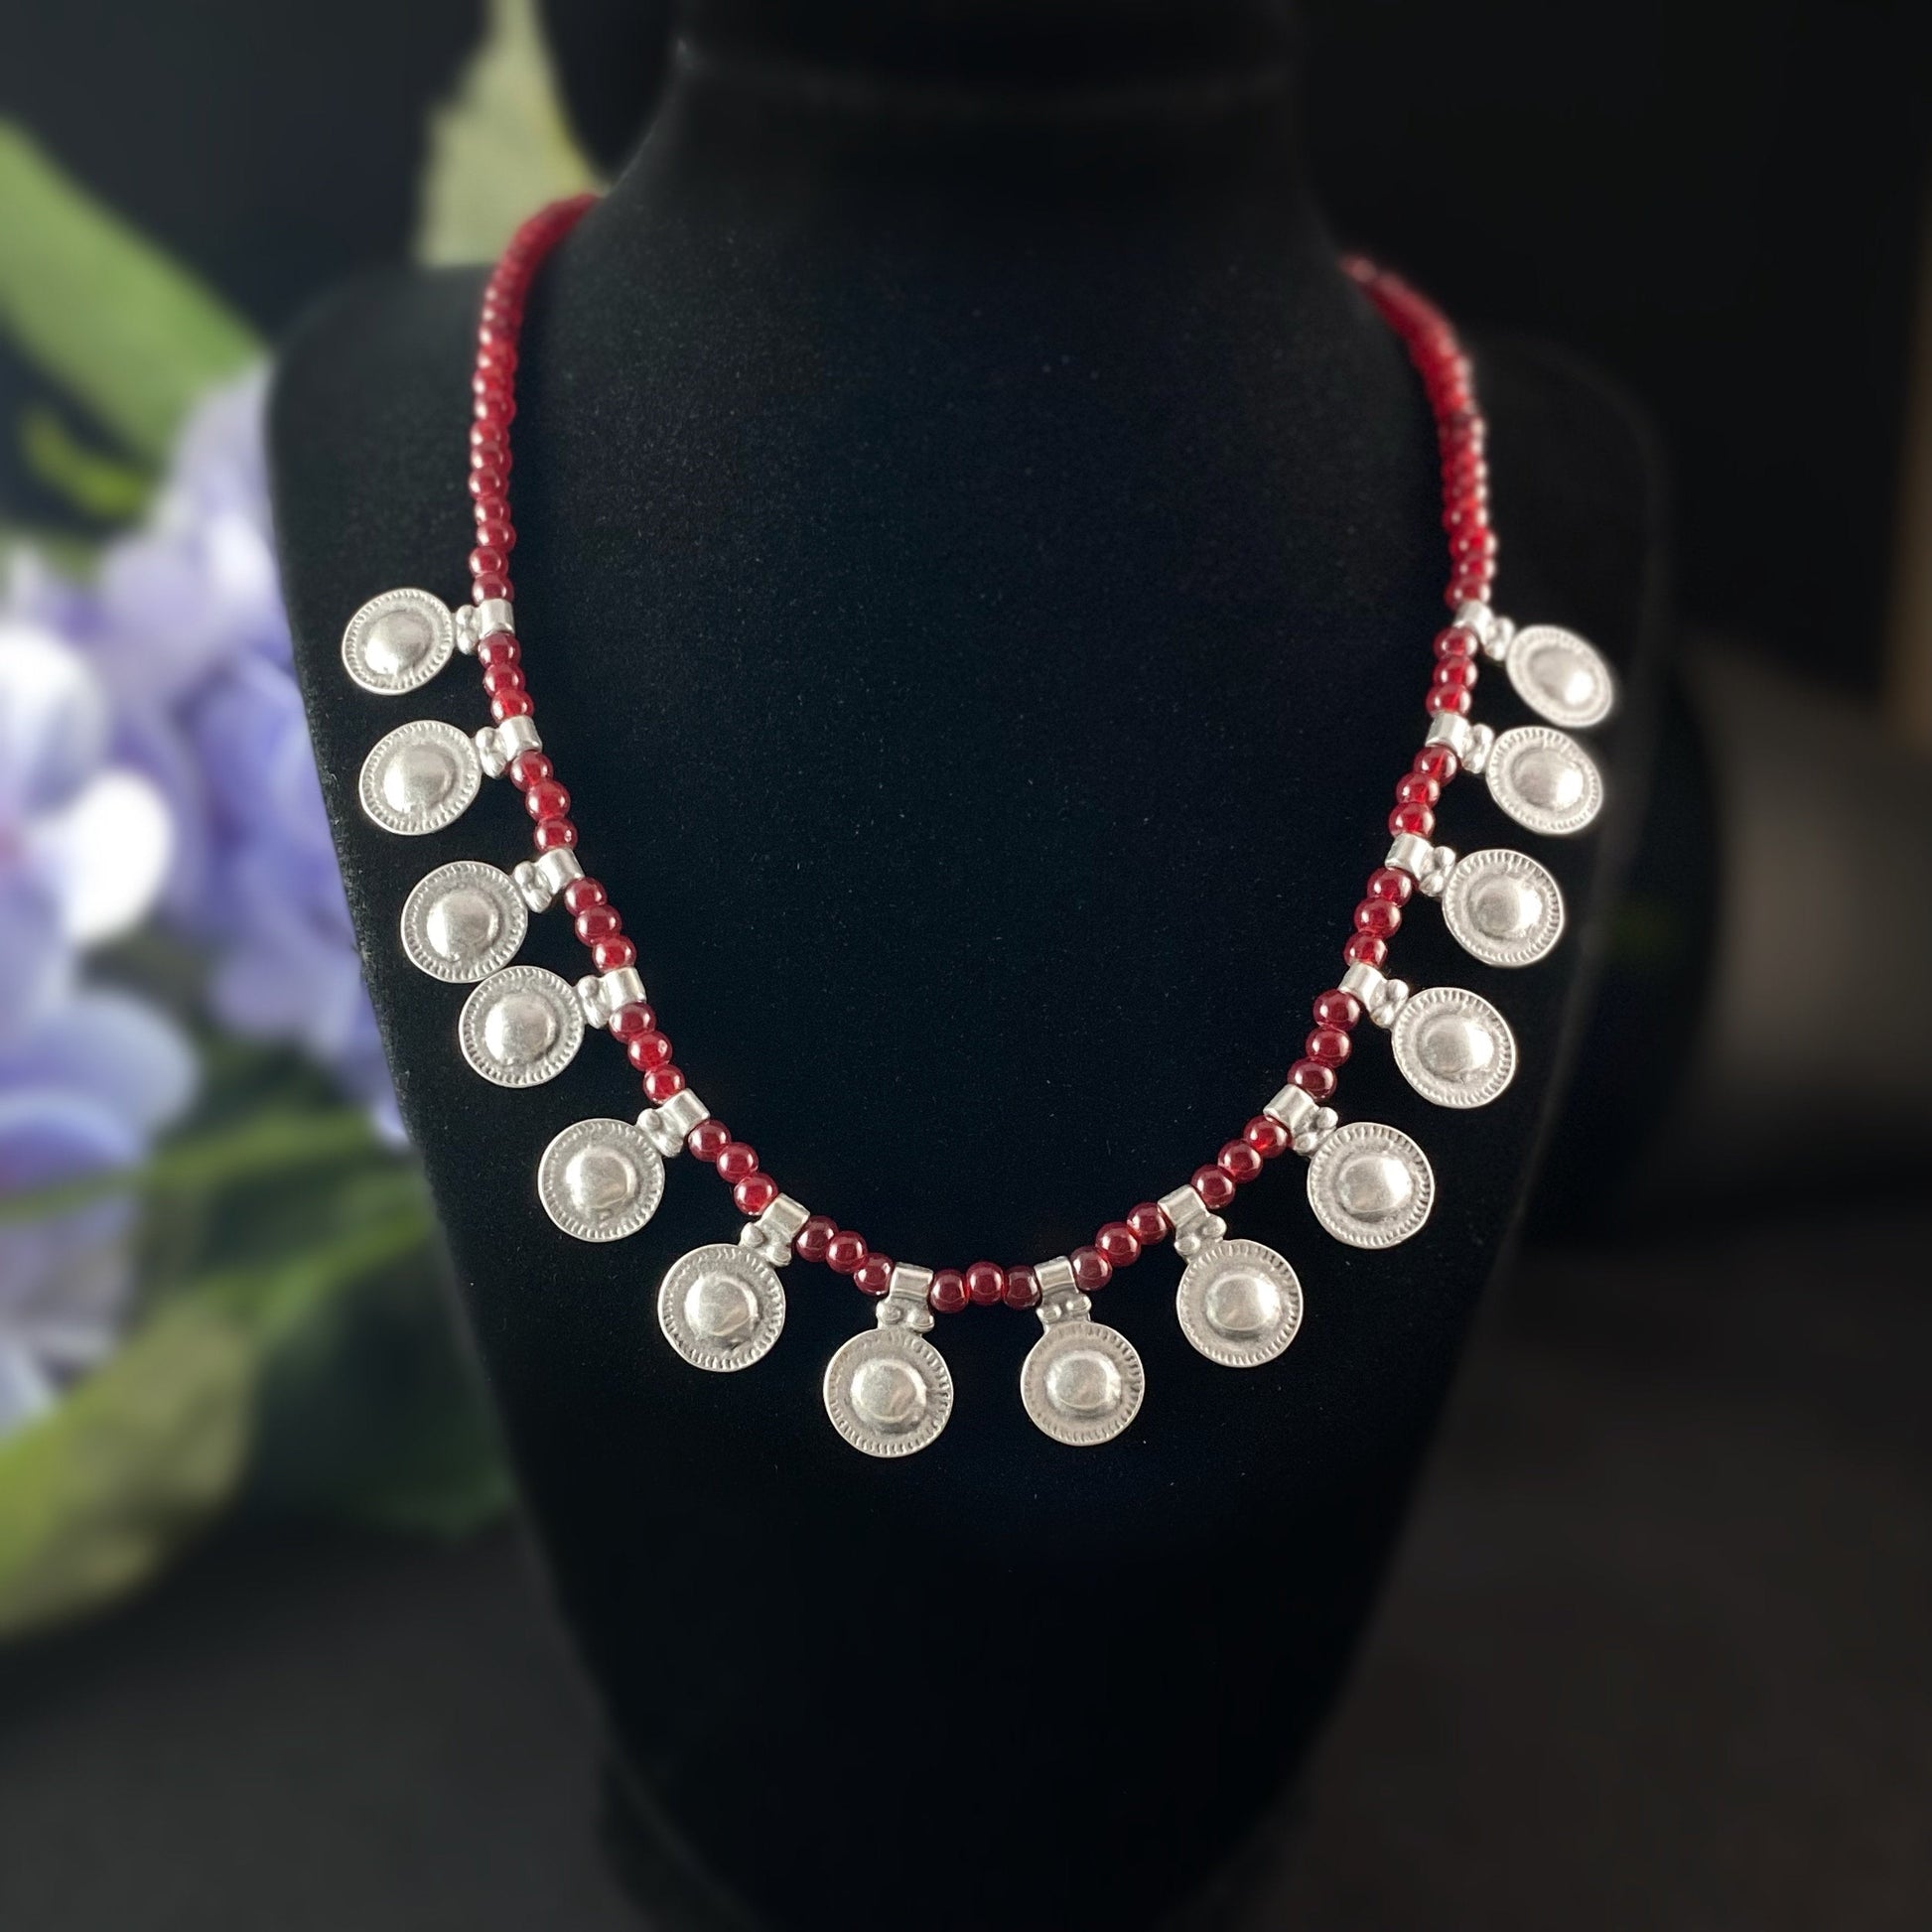 Silver Statement Necklace with Red Beads, Handmade, Nickel Free